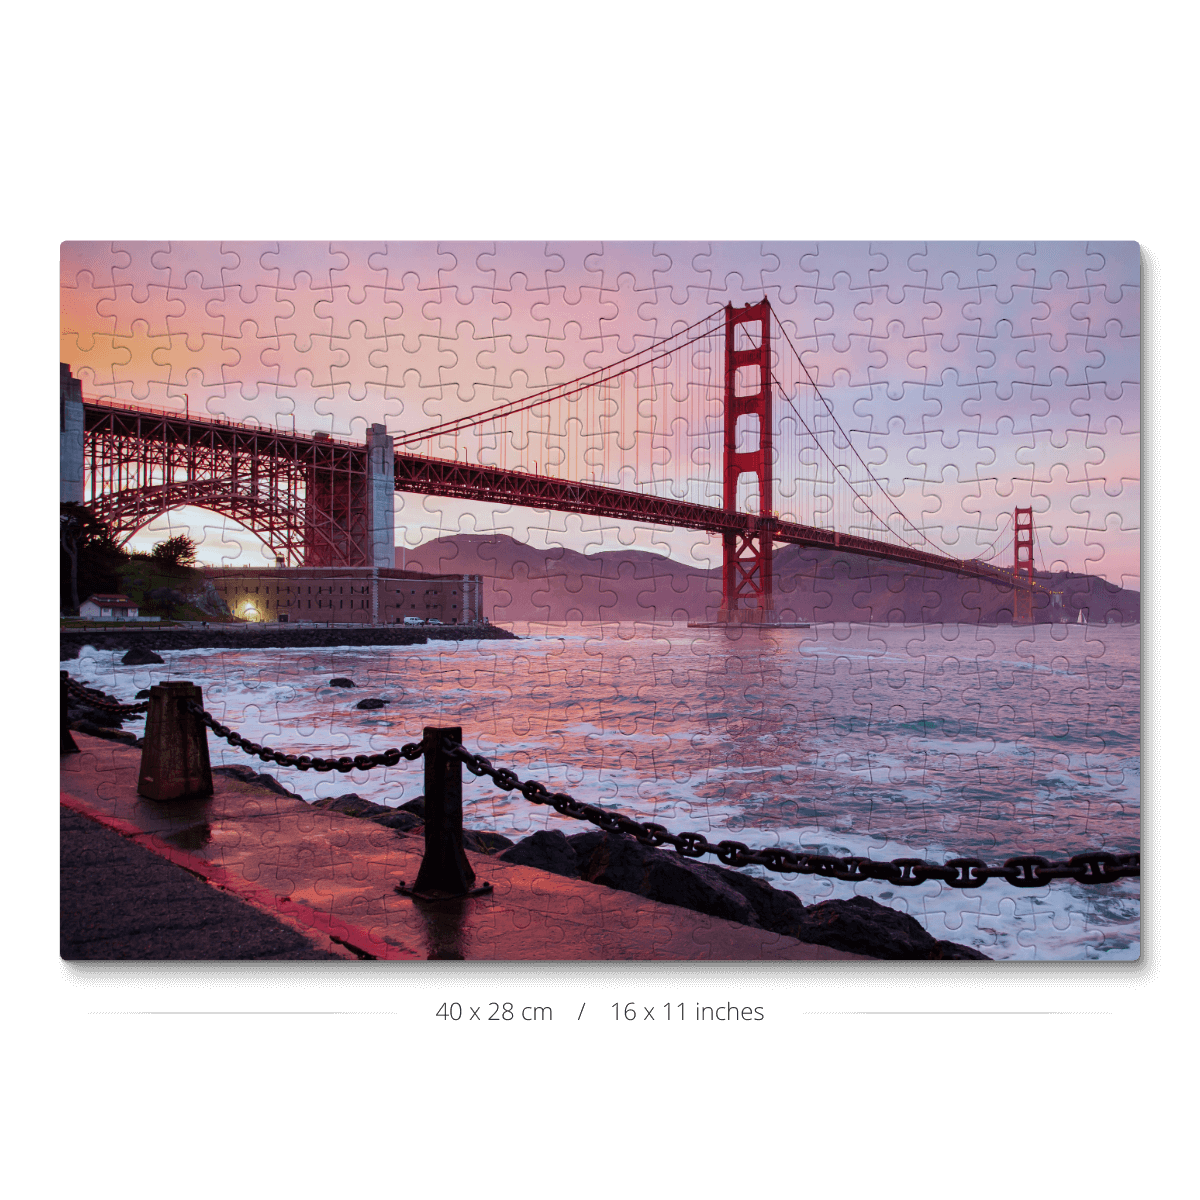 A jigsaw puzzle with a picture of the Golden Gate Bridge at sunset, consisting of 300 pieces.